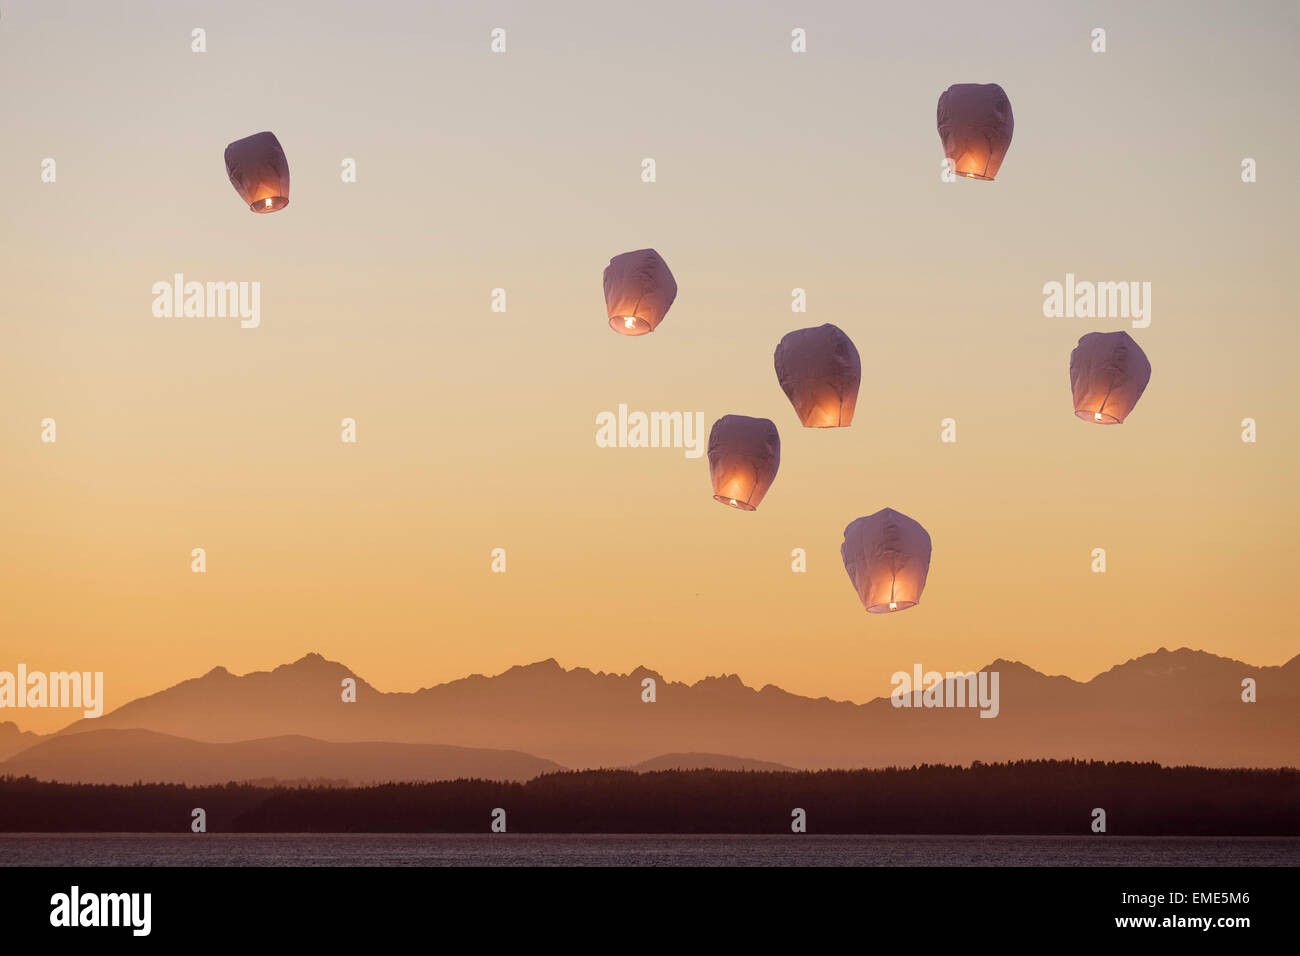 A group of flying lanterns being released into the nightsky Stock Photo